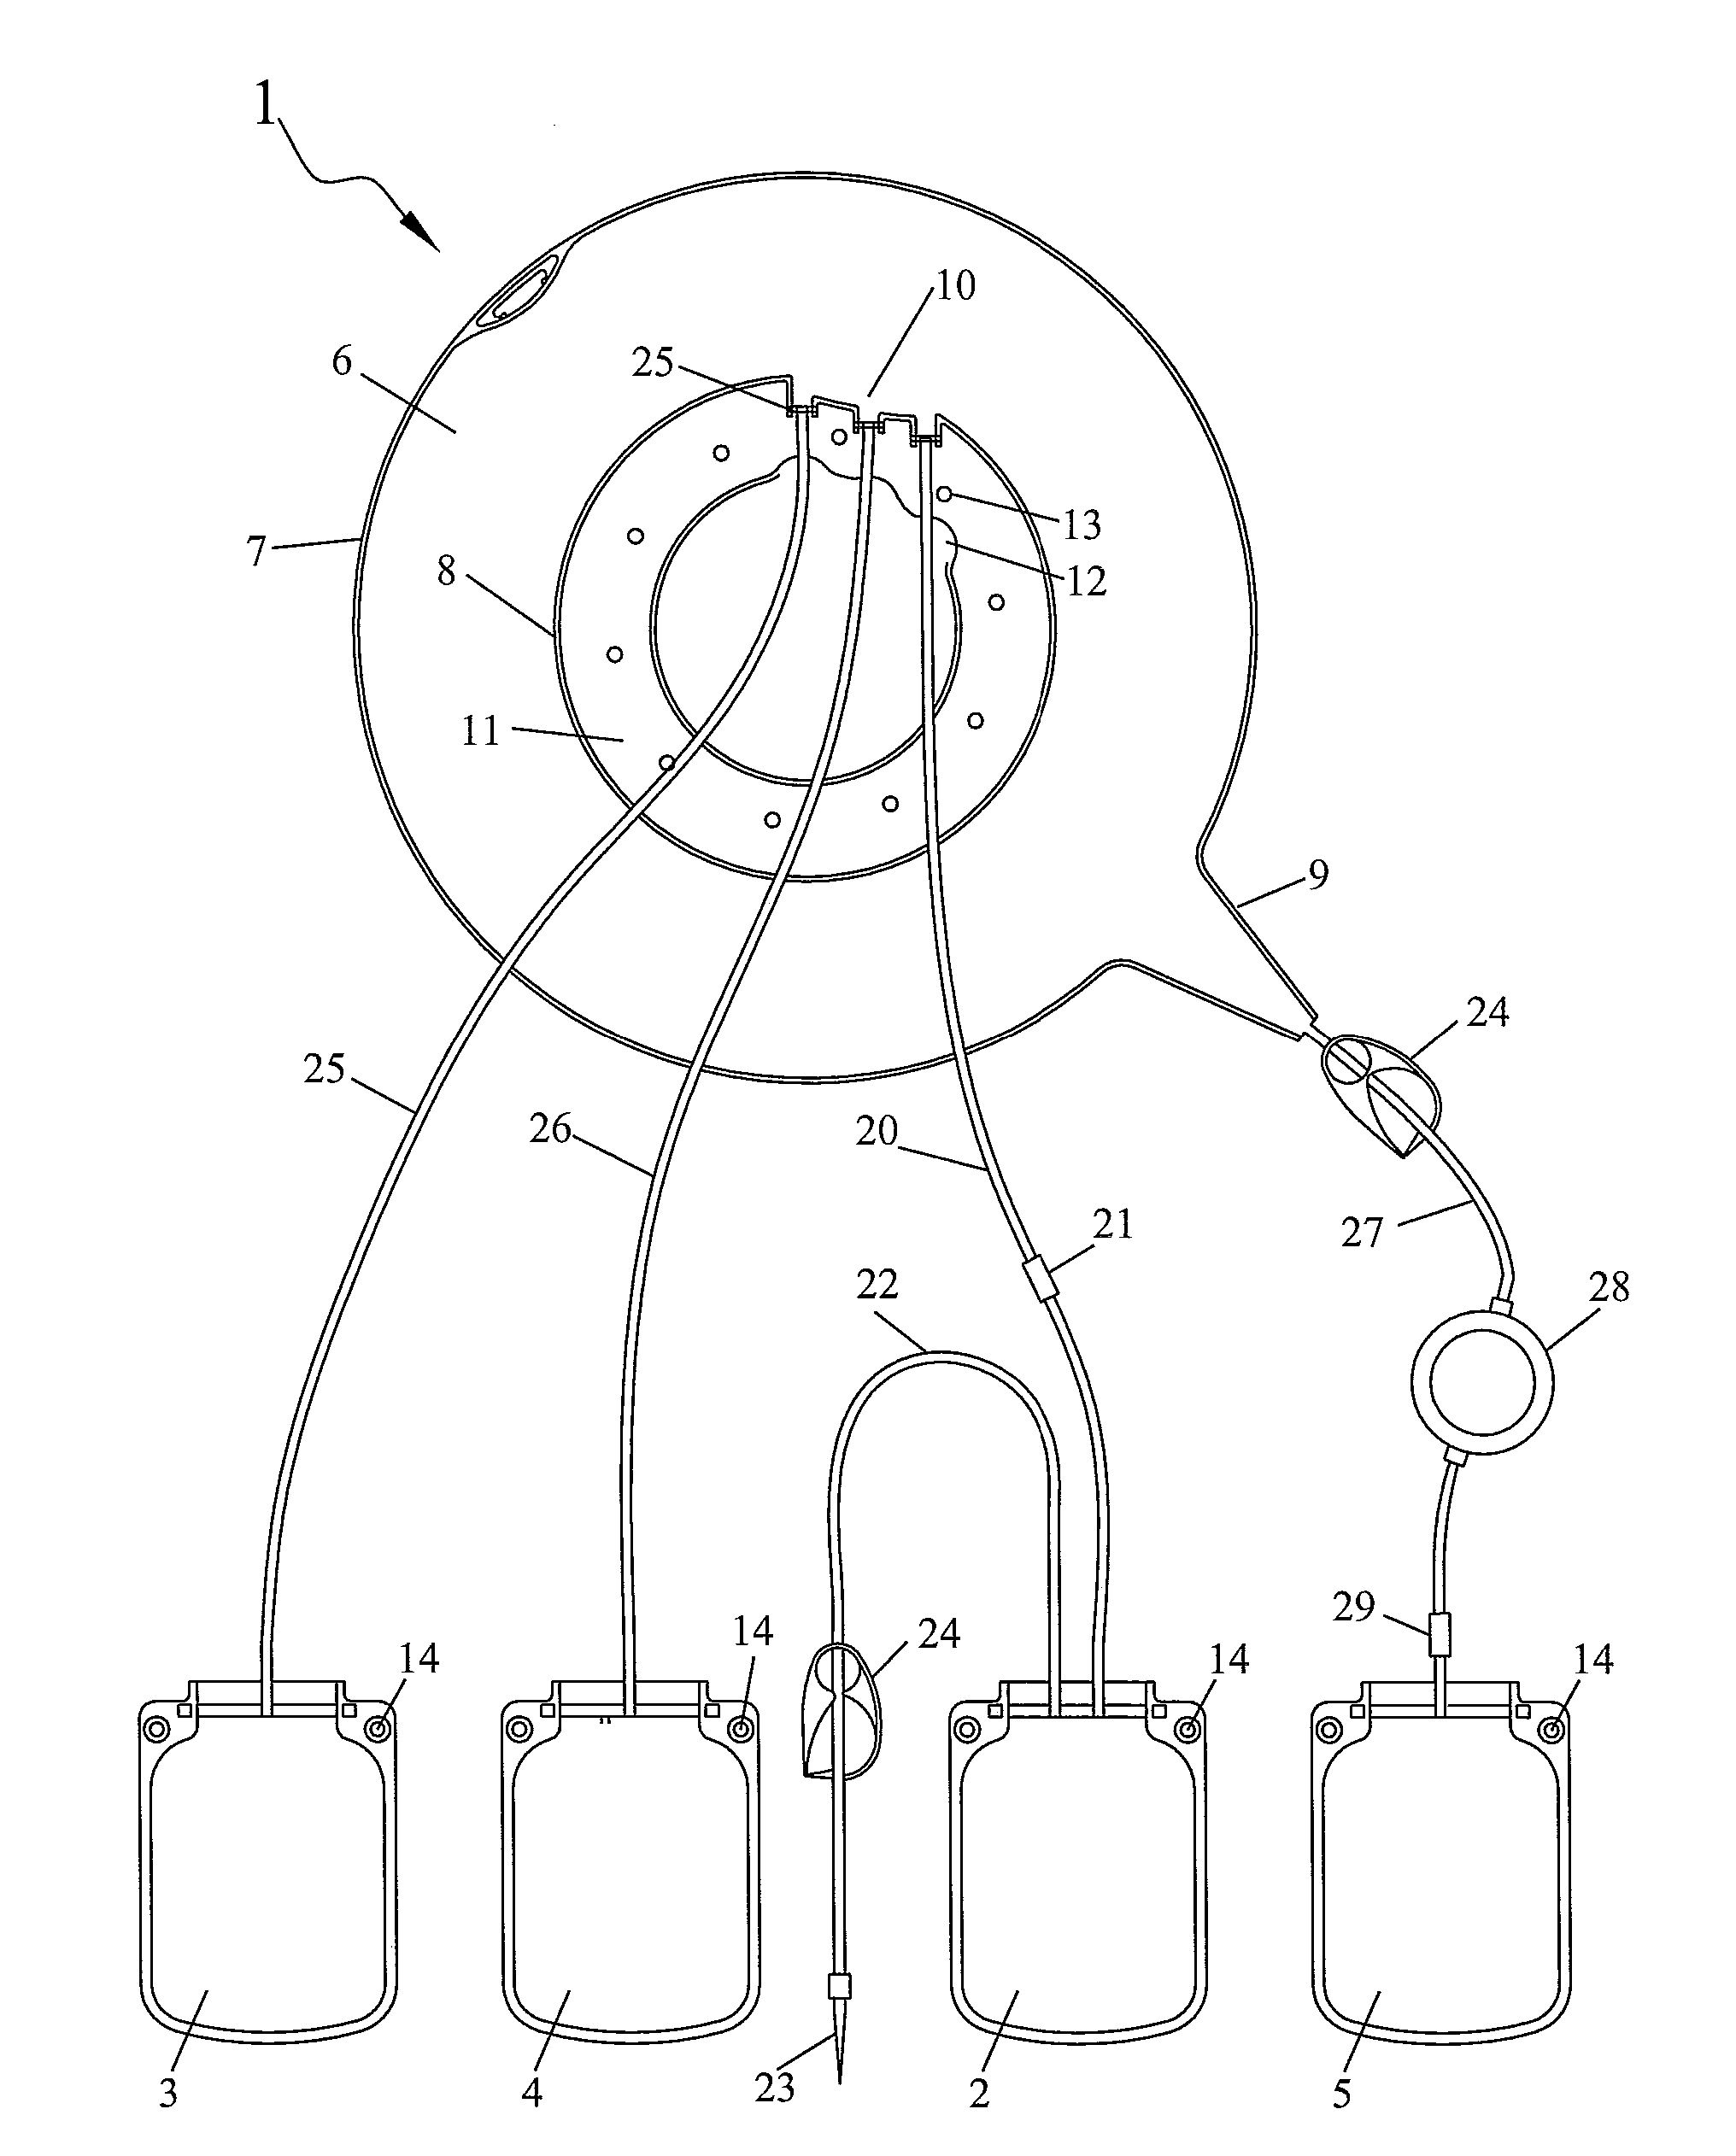 Method for Optimizing Spin Time In a Centrifuge Apparatus for Biologic Fluid